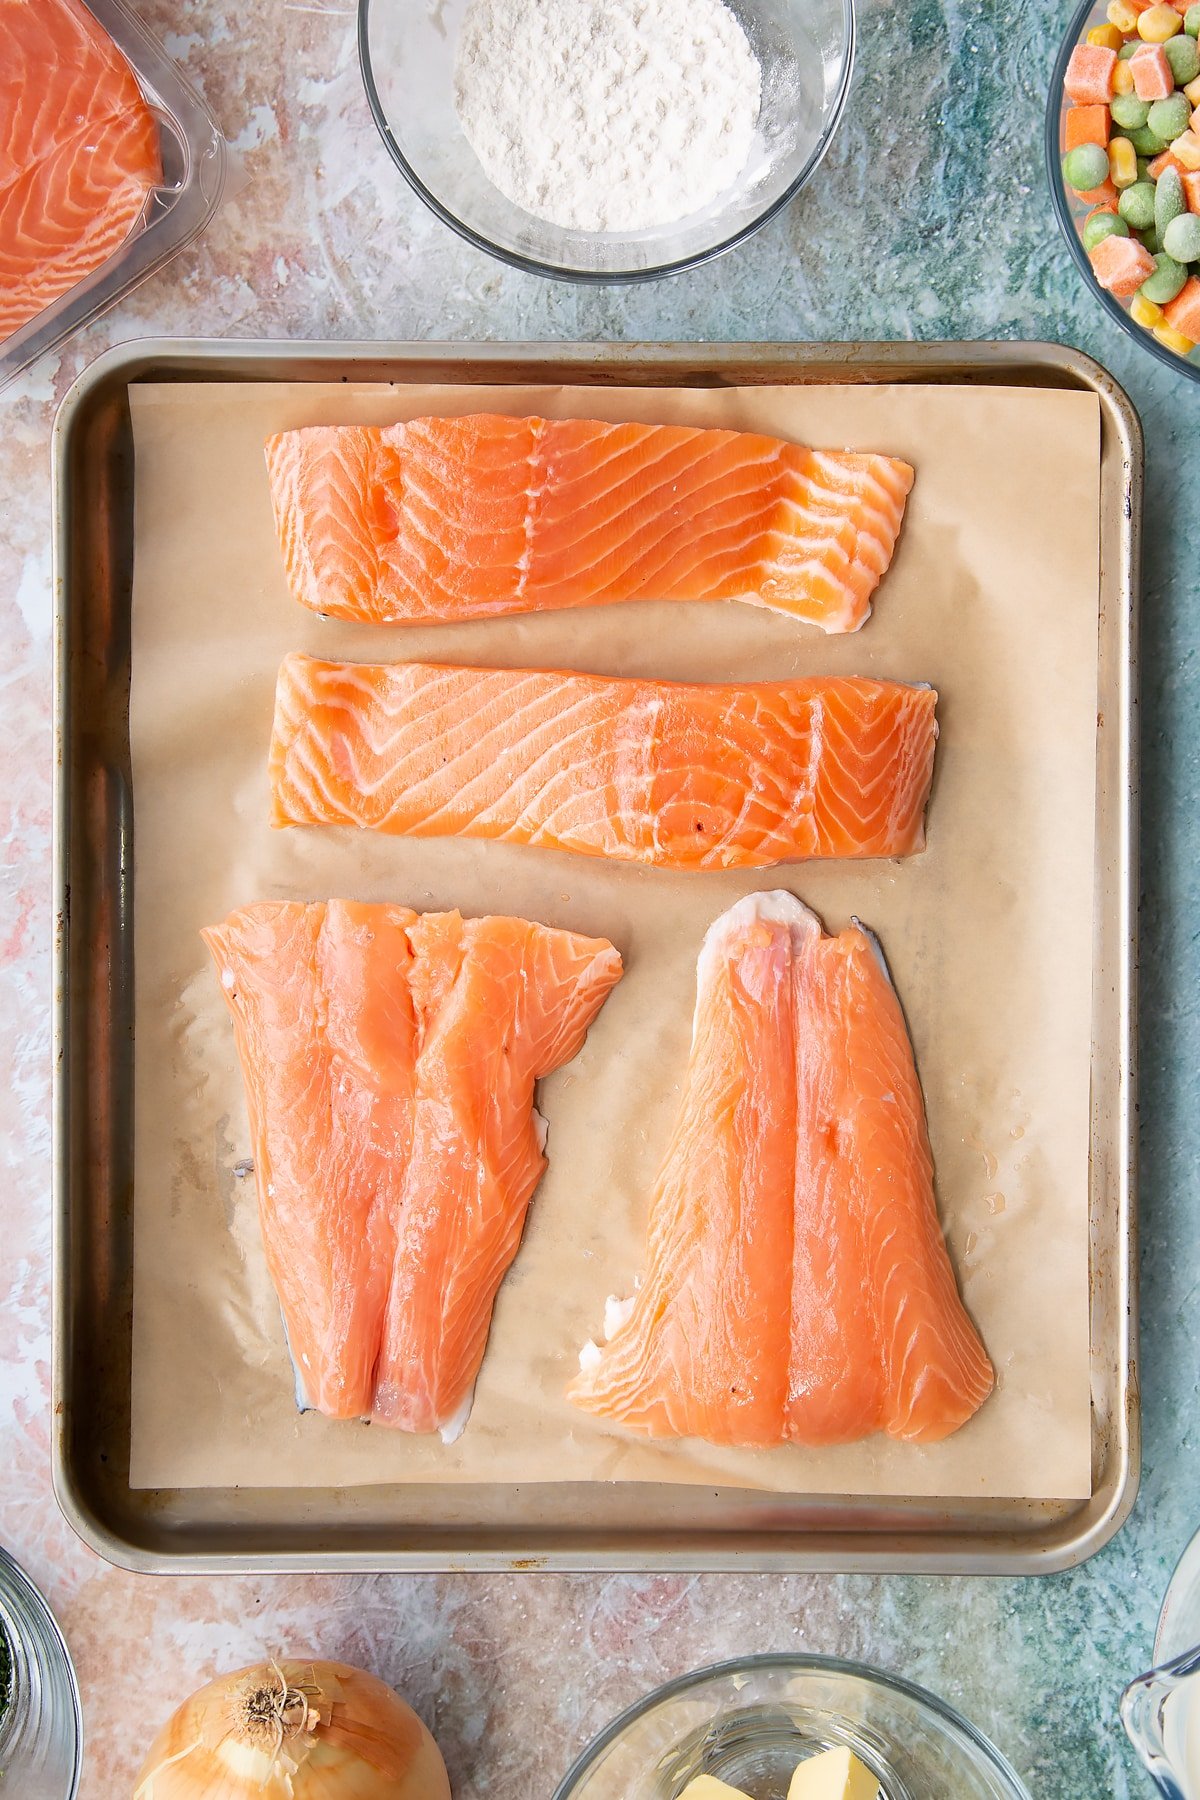 Large pieces of salmon laid out on a large baking sheet.